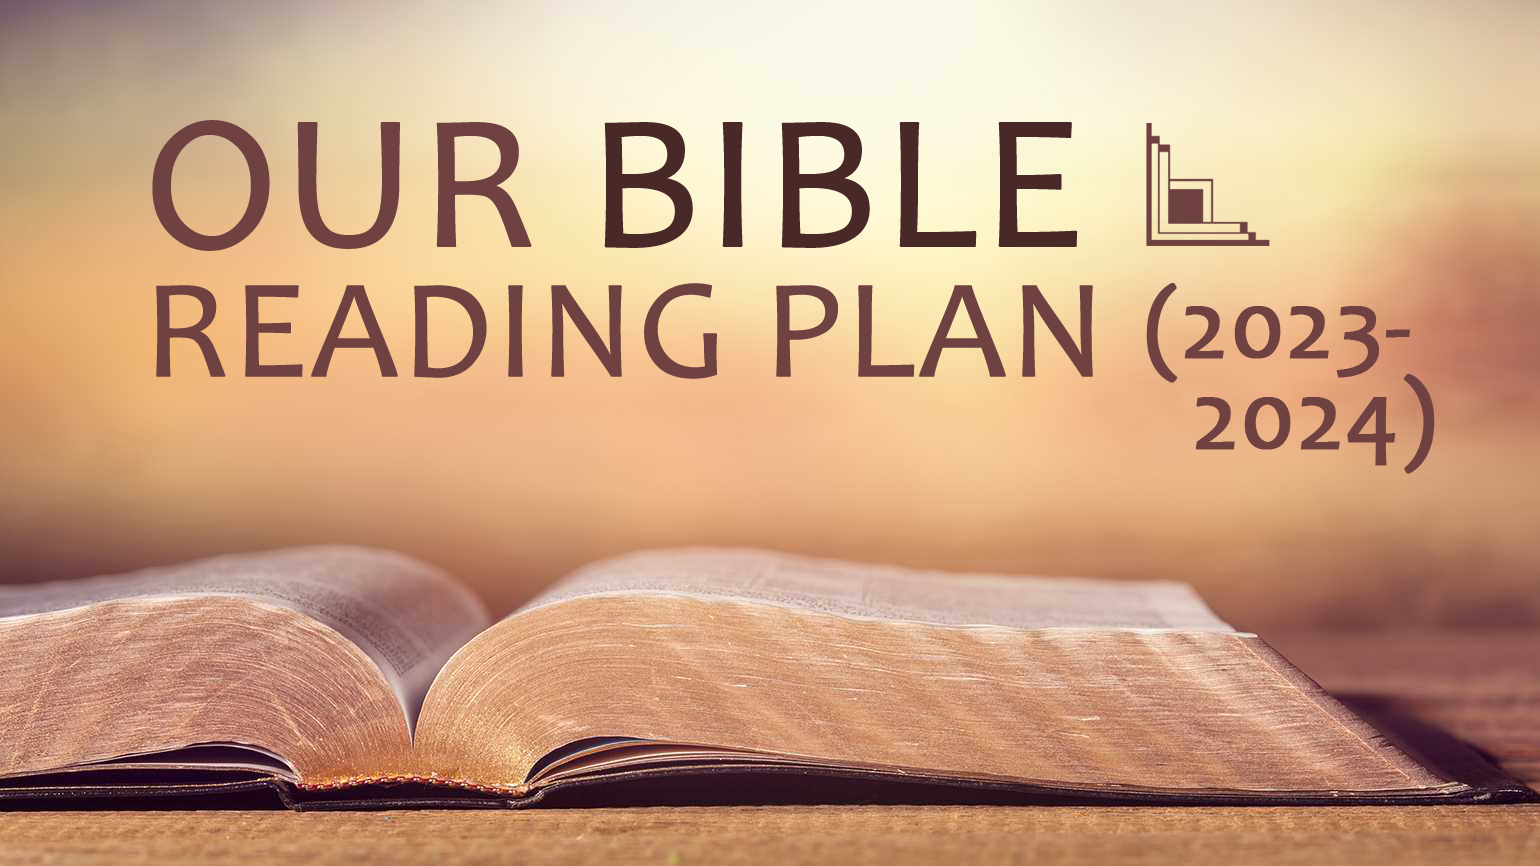 Our Bible Reading Plan (2023-2024) banner